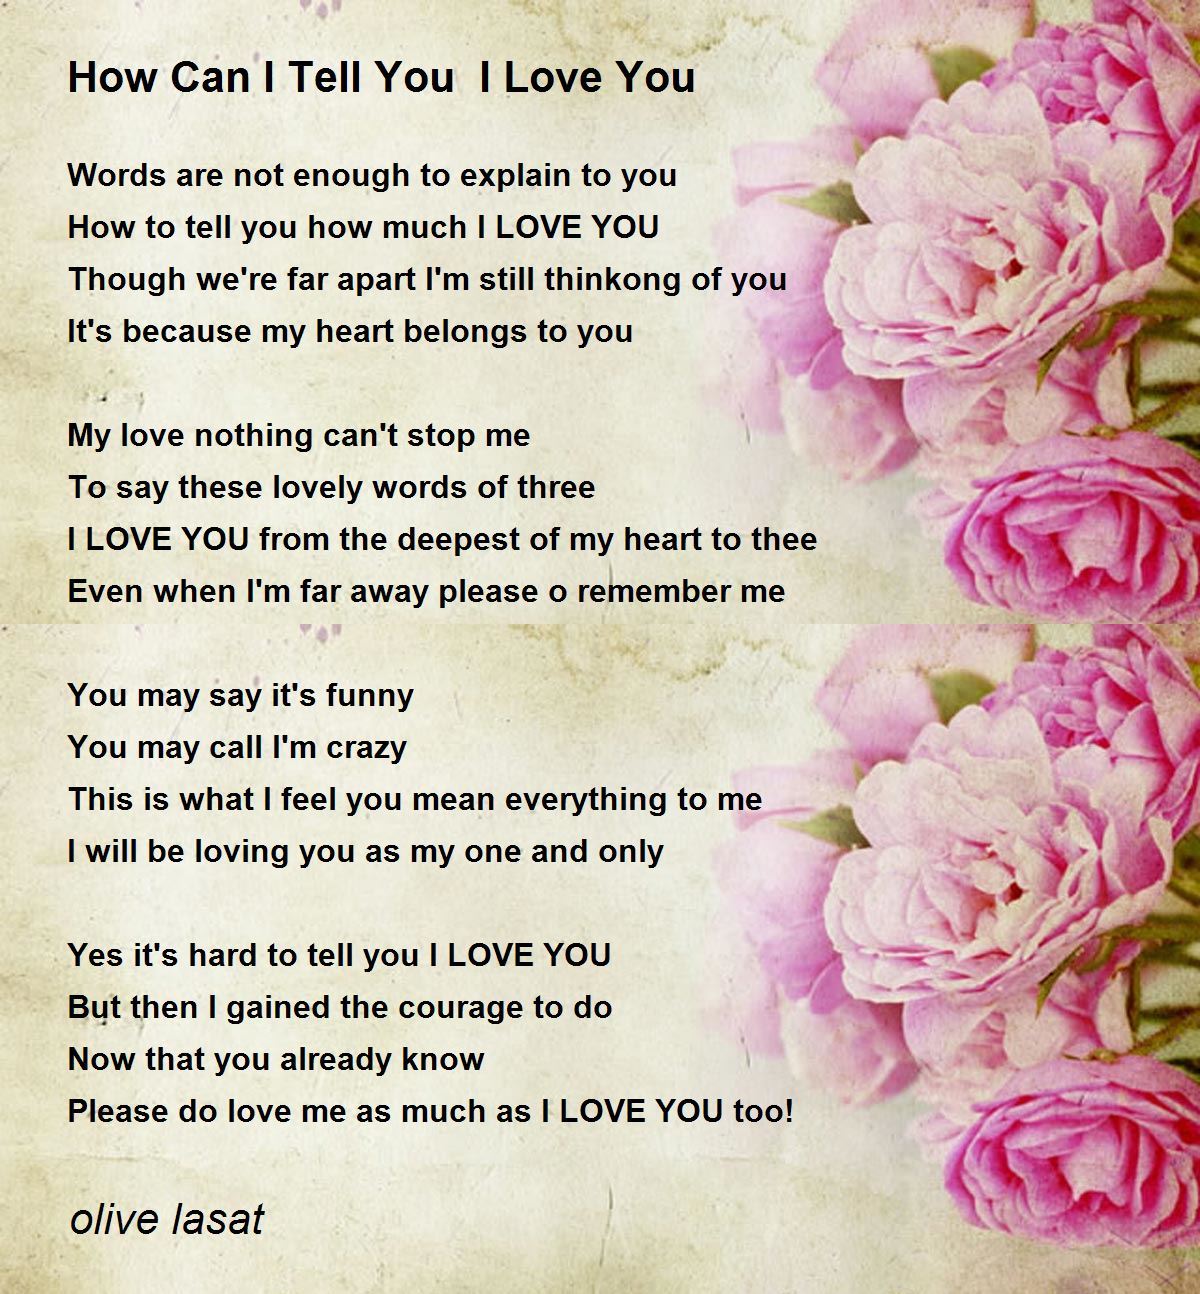 How Can I Tell You I Love You By Olive Lasat How Can I Tell You I Love You Poem